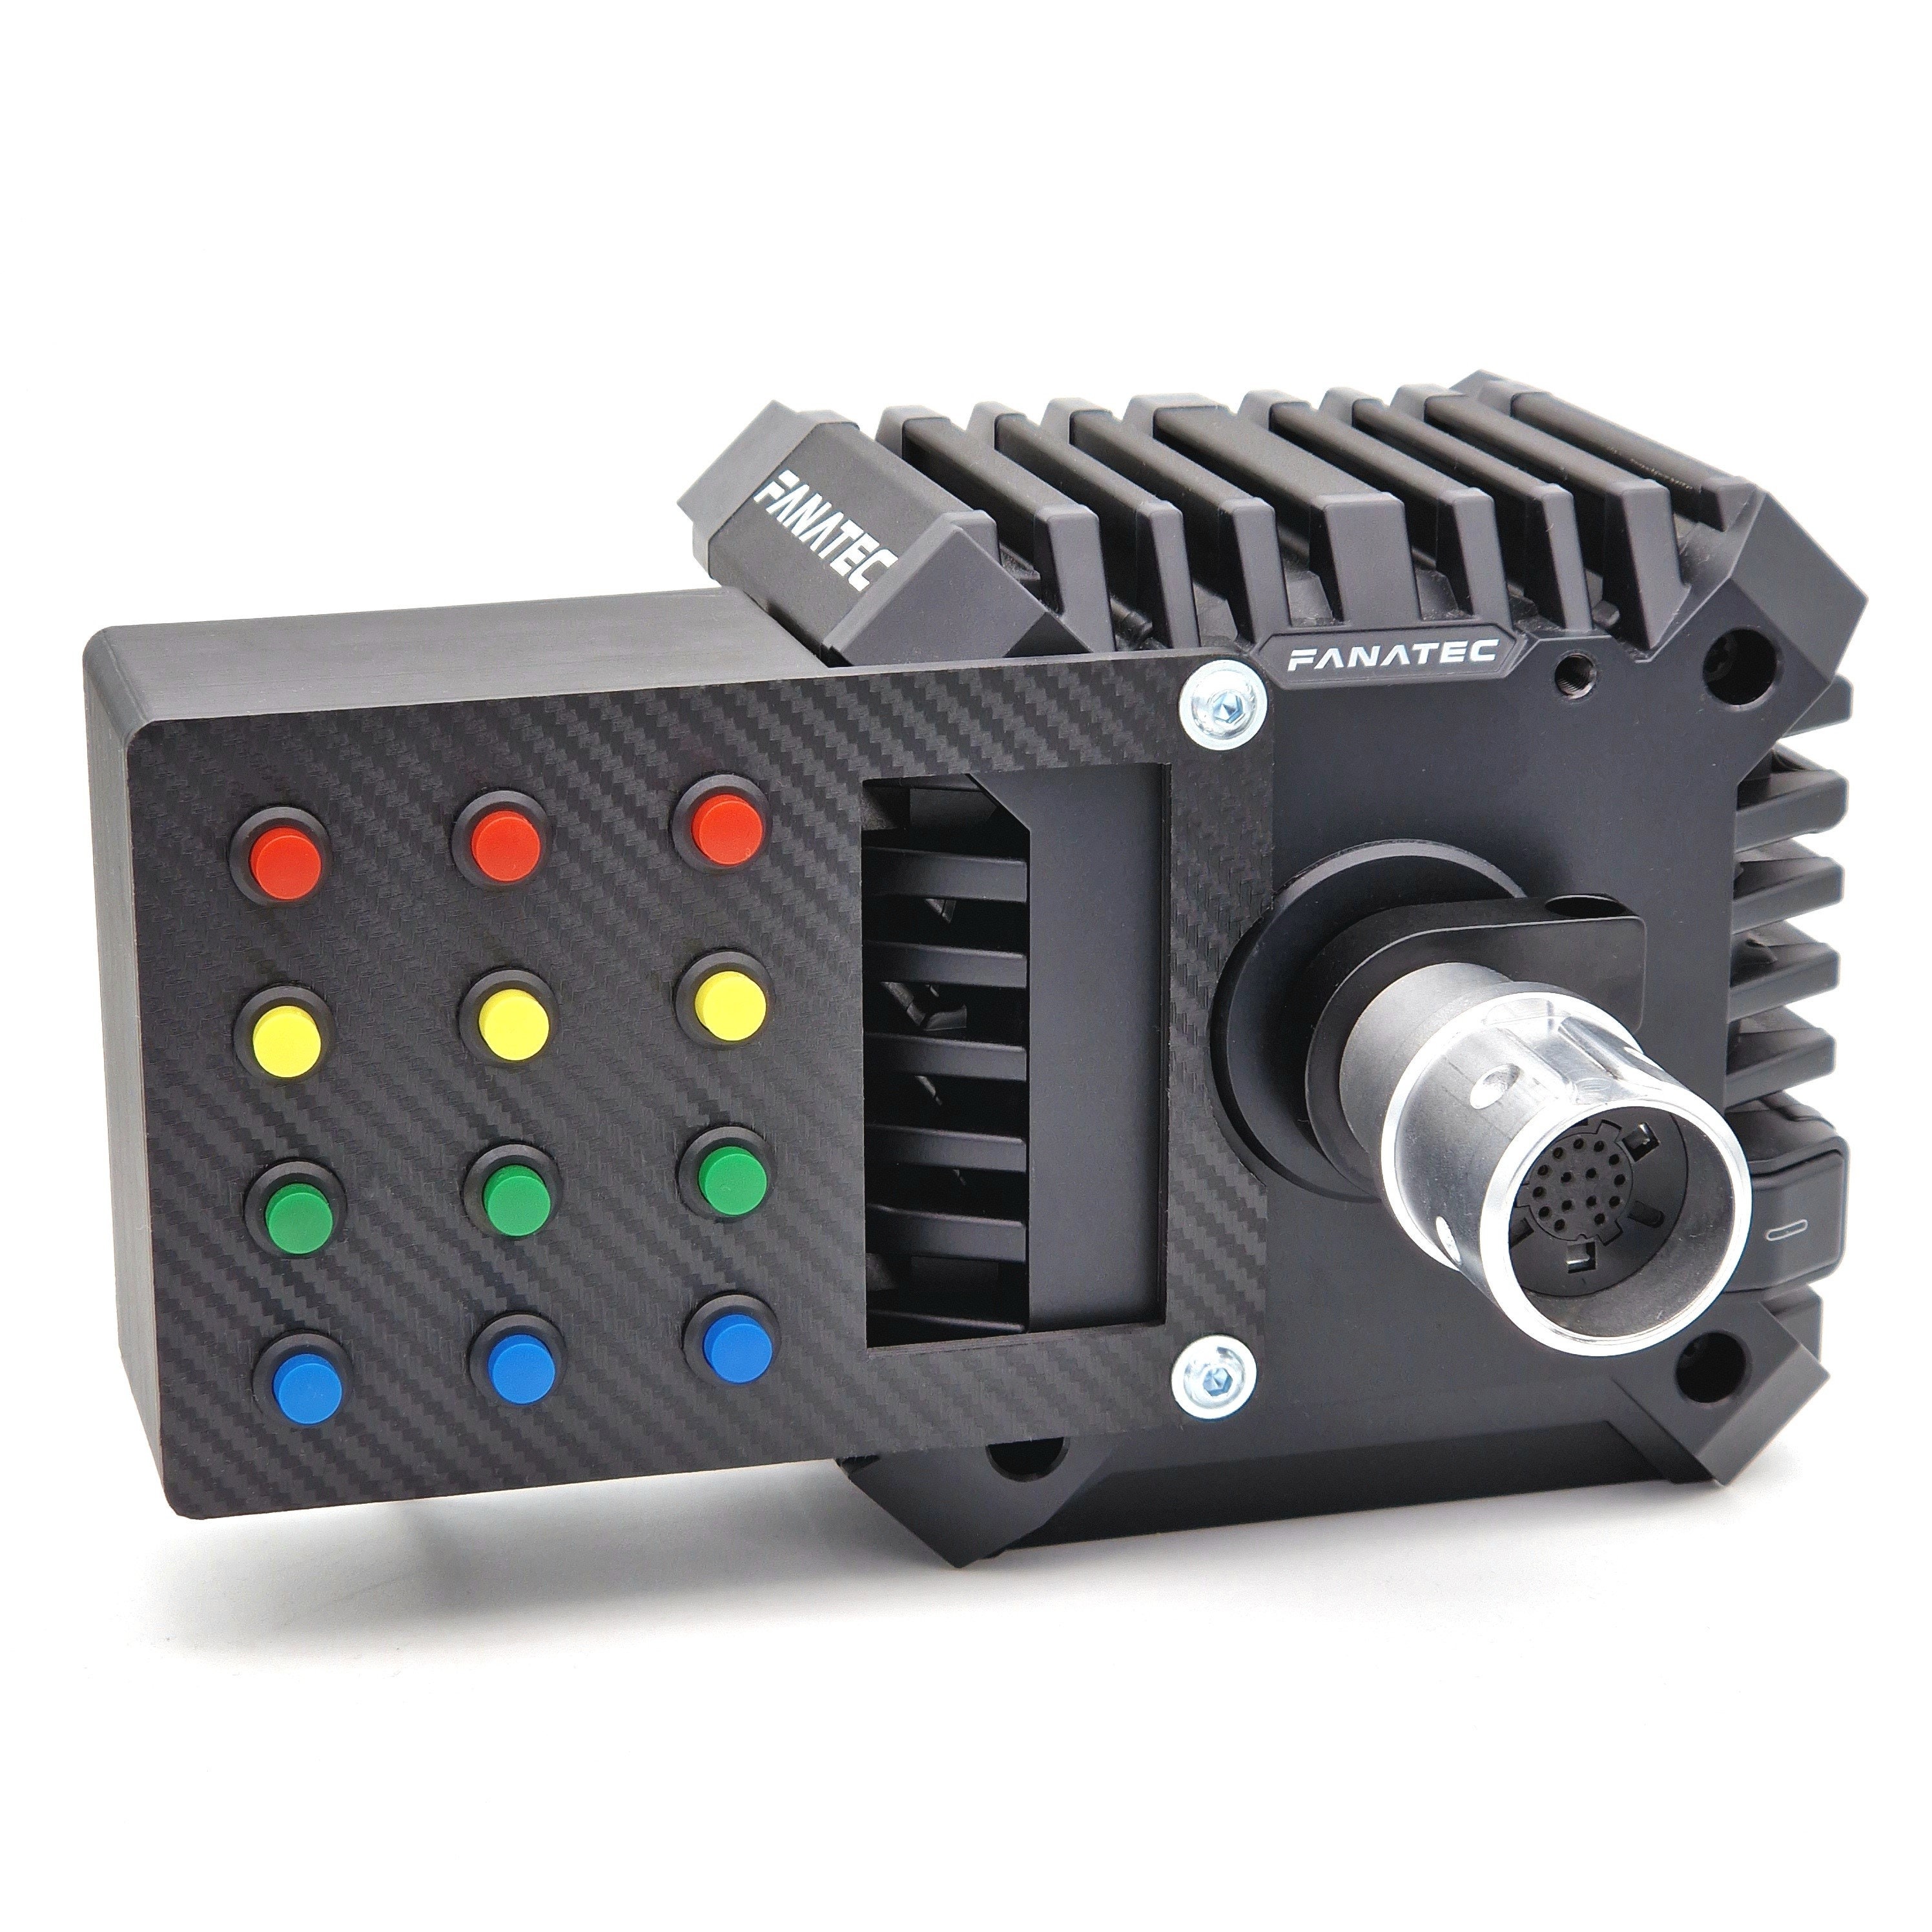 PC Sim Racing Button Box With Mount for Fanatec Podium or DD 